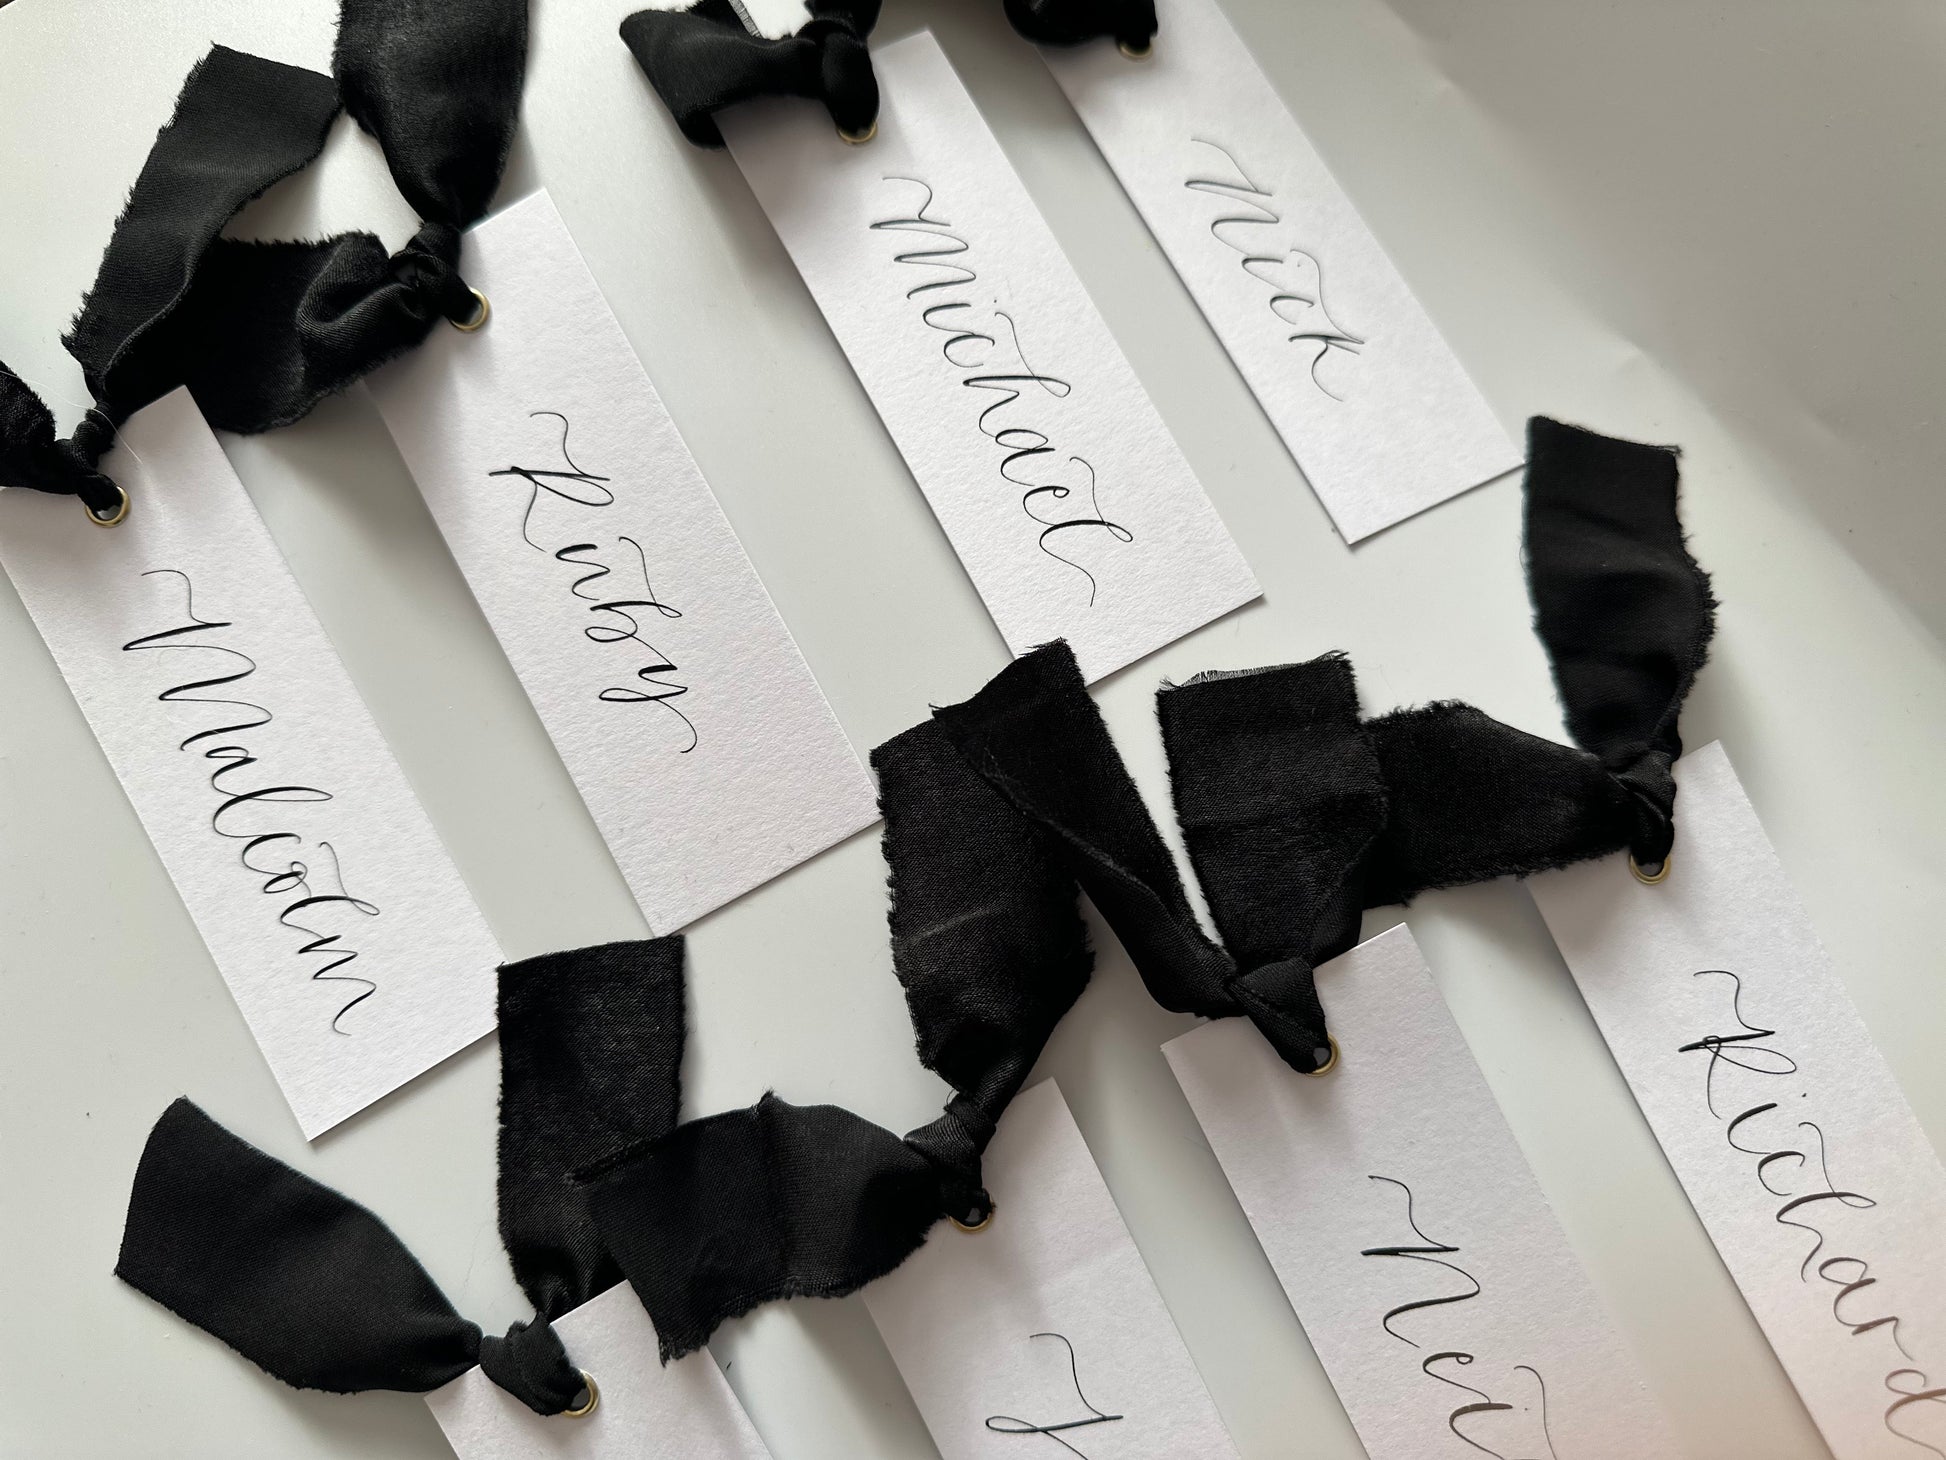 Black Wedding place cards, Table name cards, Wedding name cards, calligraphy place cards, ribbon place cards